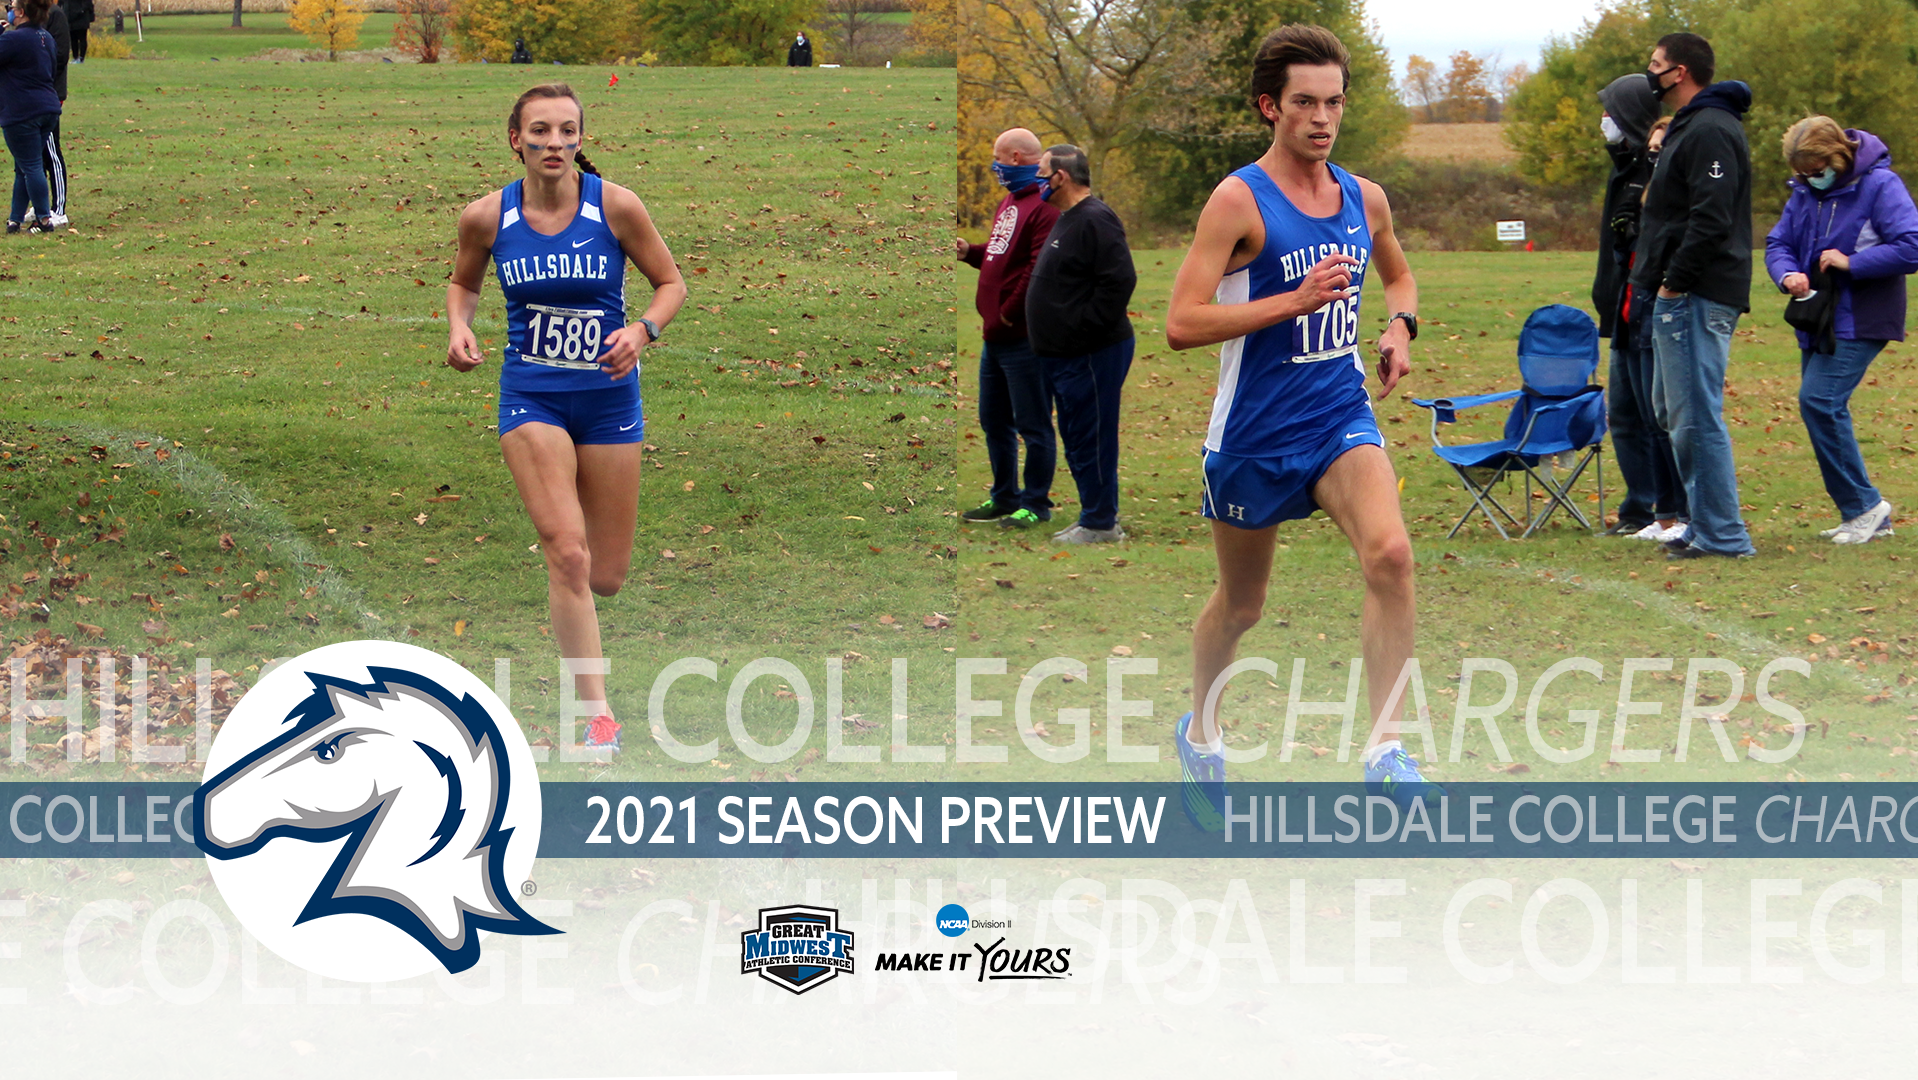 Charger men's and women's cross country teams announce schedule, look for NCAA return in 2021